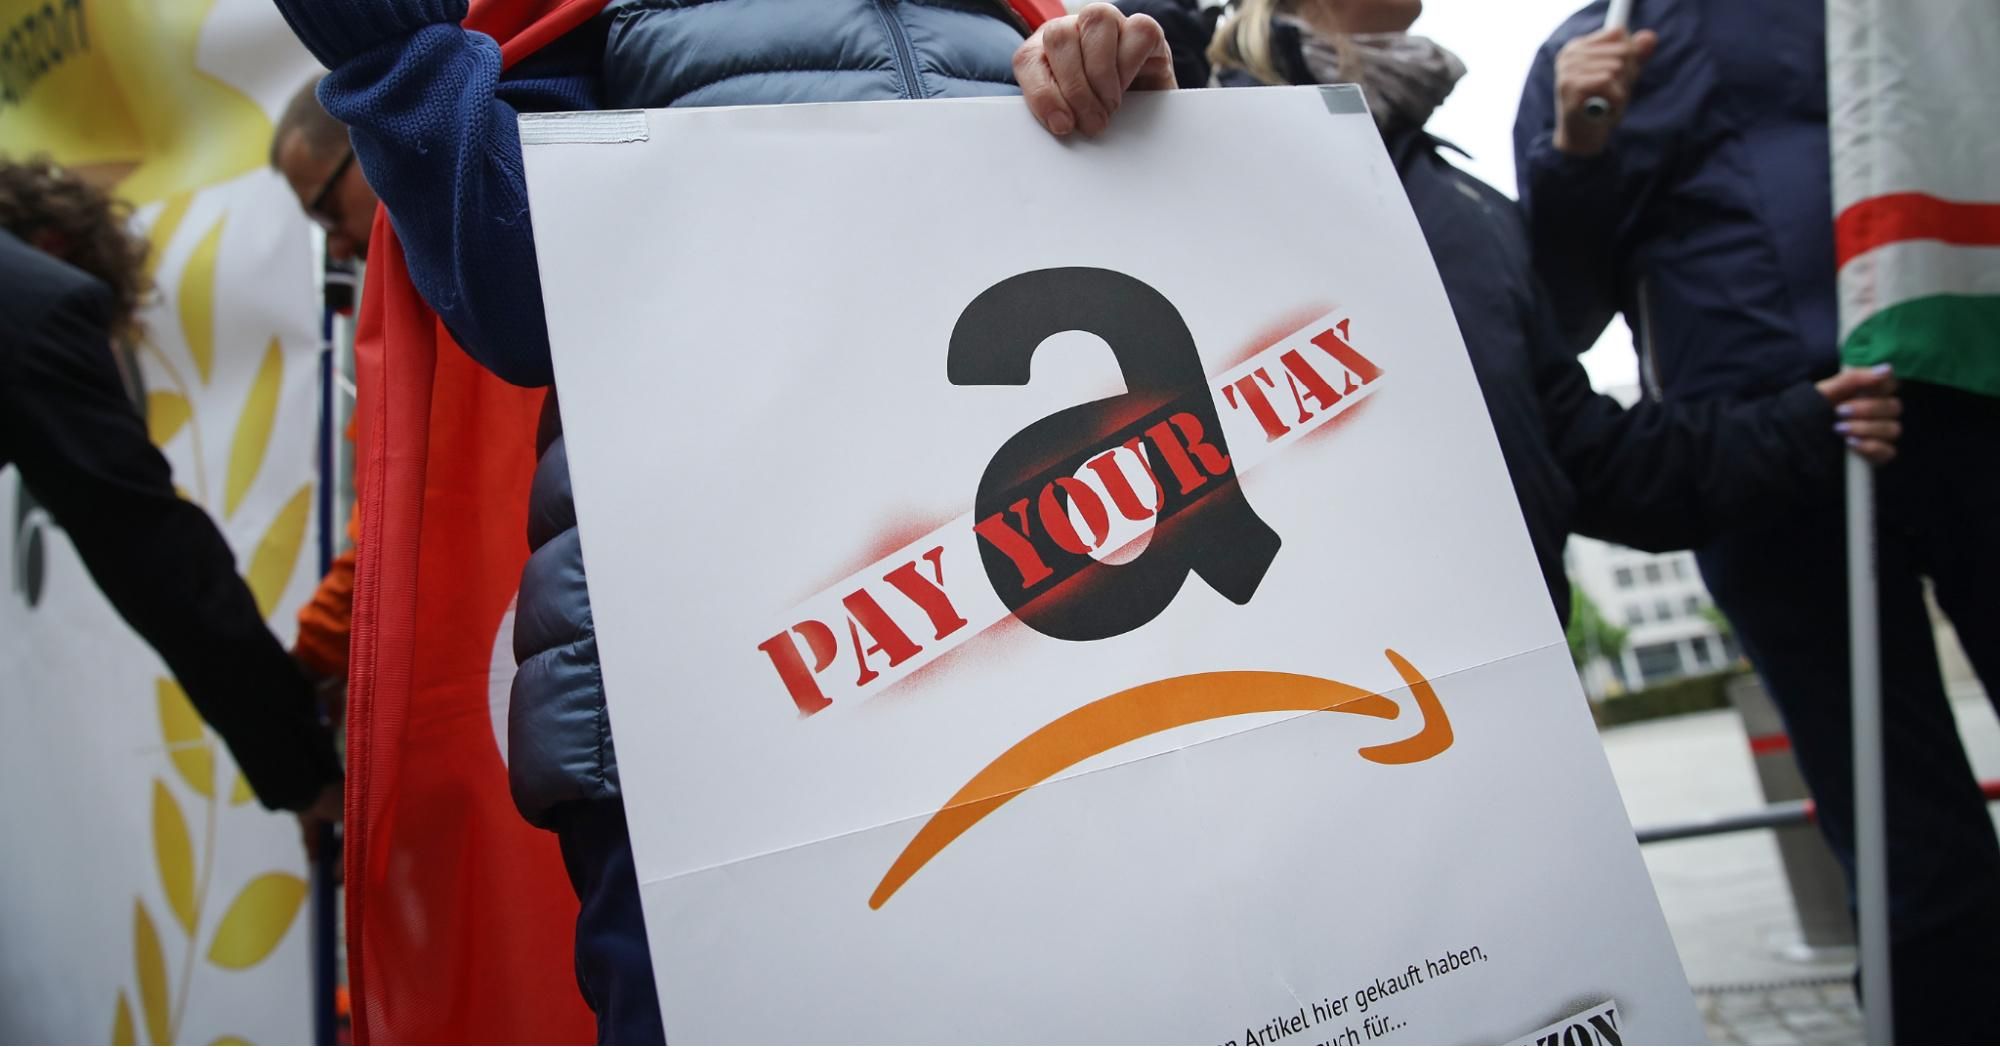 An activist holding a sign demanding online retailer Amazon pay its share of taxes joins a protest outside the Axel Springer building on April 24, 2018 in Berlin, Germany. (Photo: Sean Gallup via Getty Images)